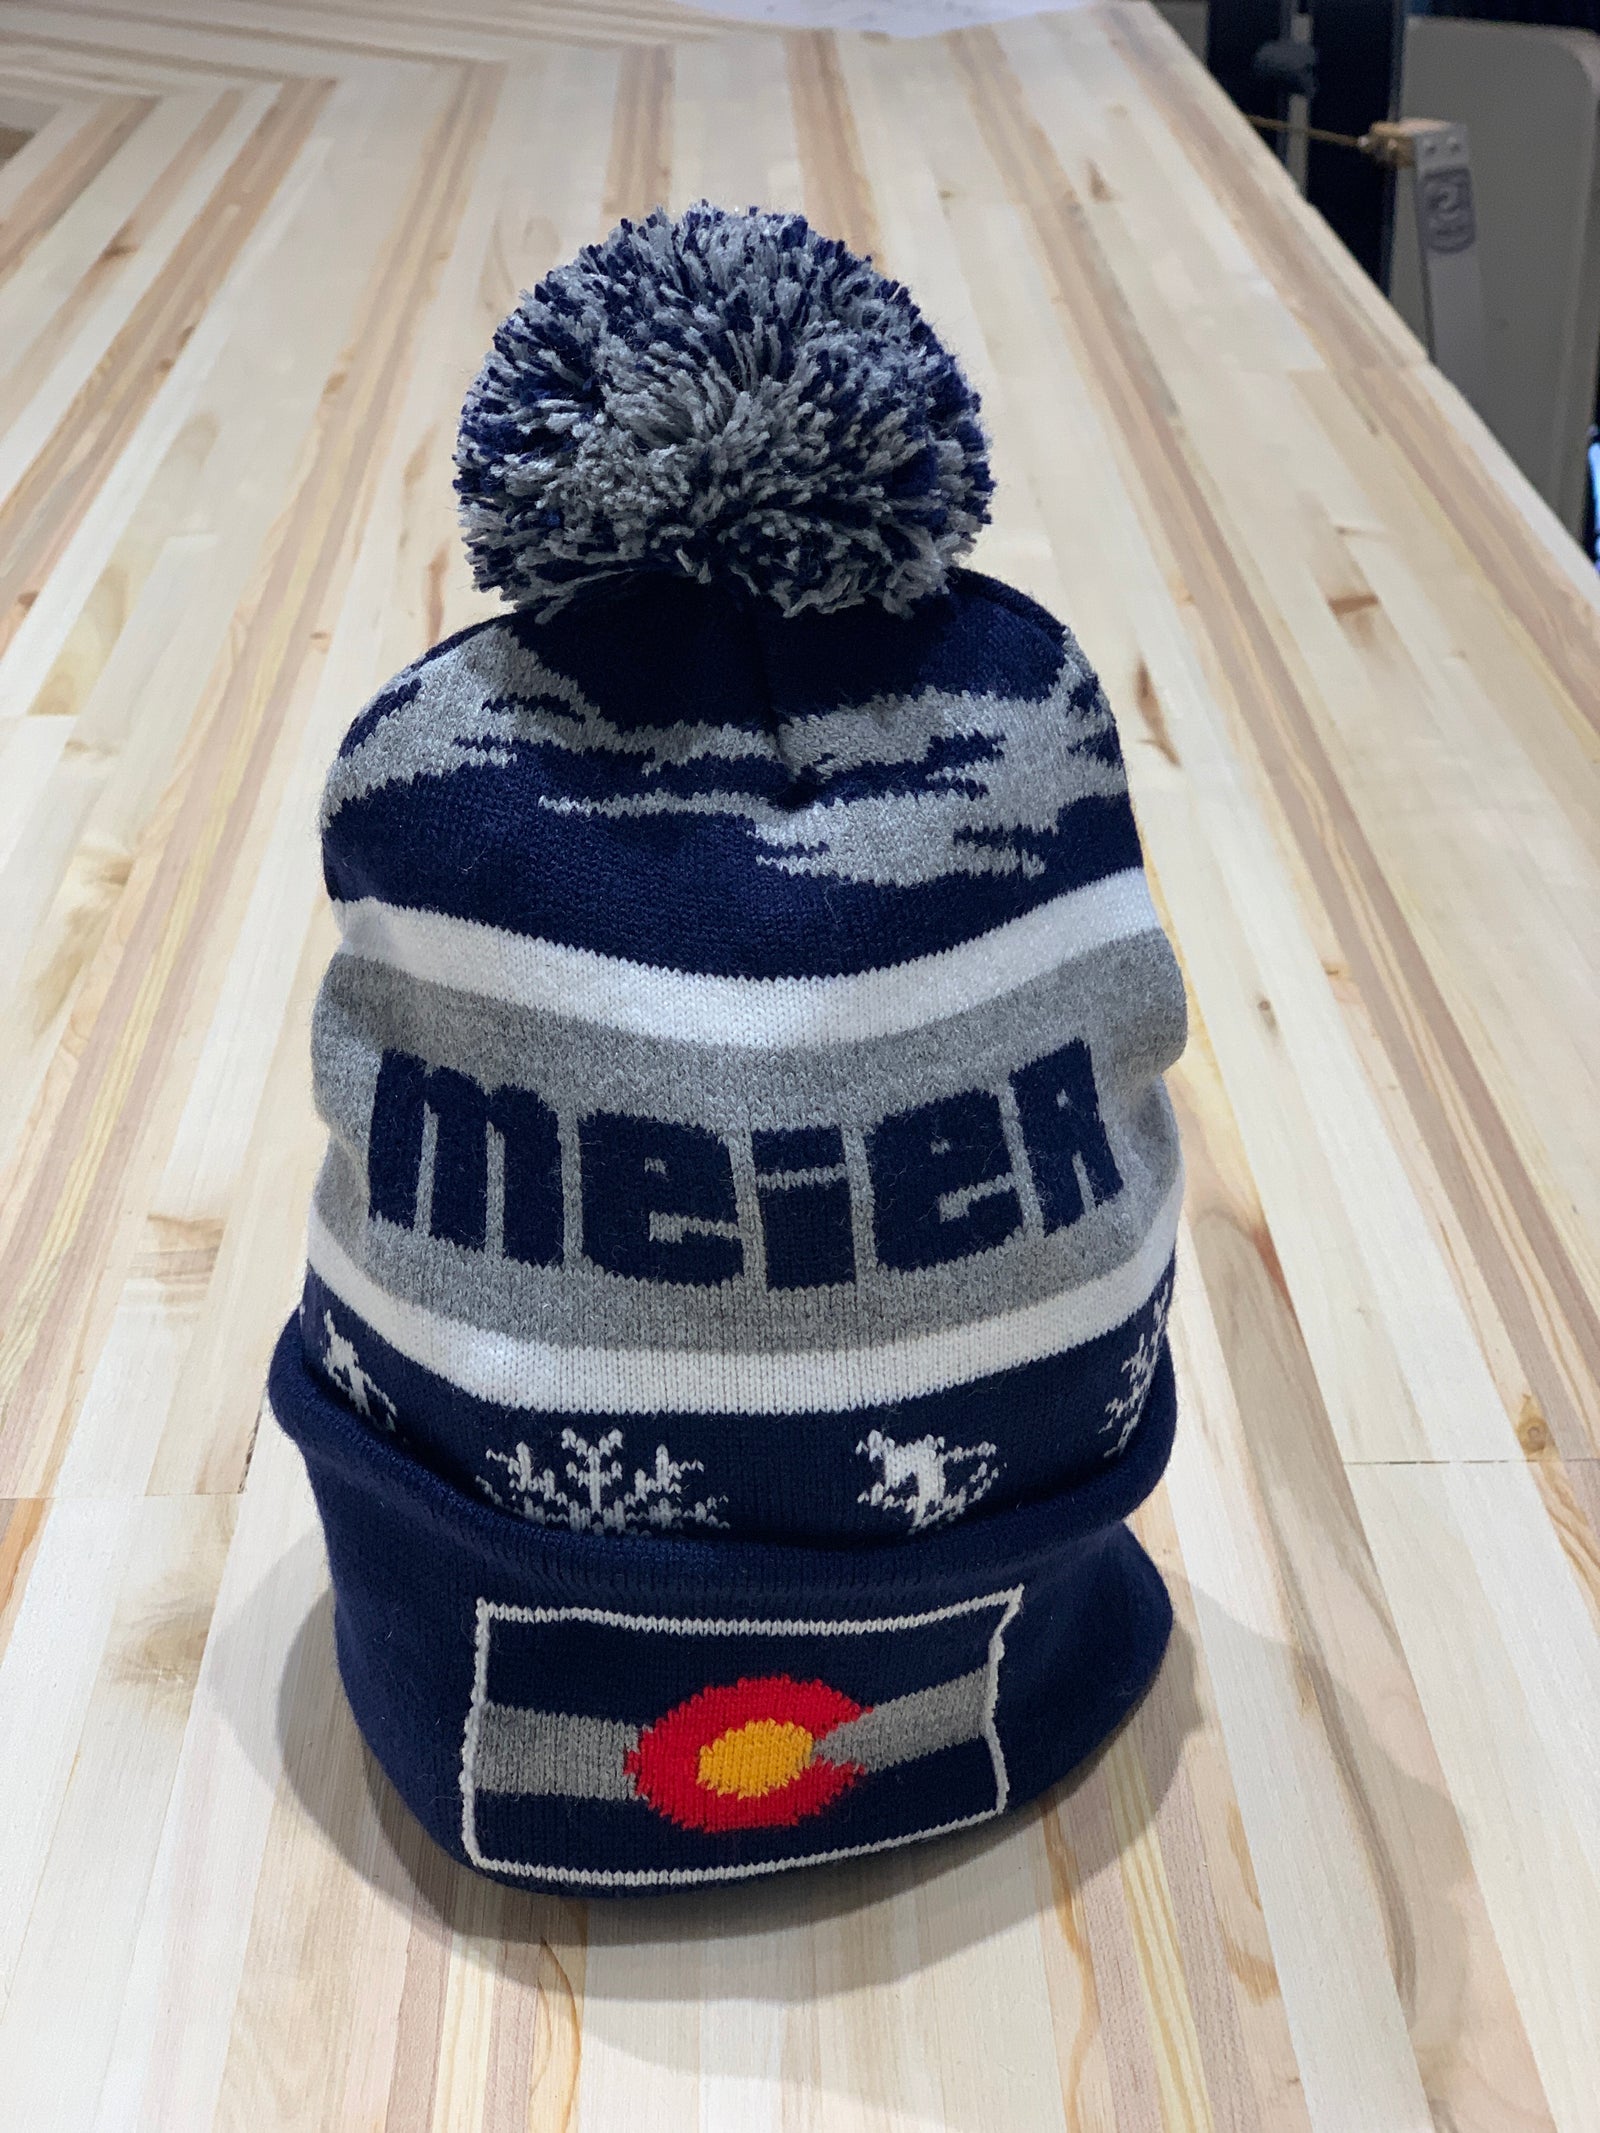 Featured Merch from Meier Skis | Shop Online or In-Store in Denver